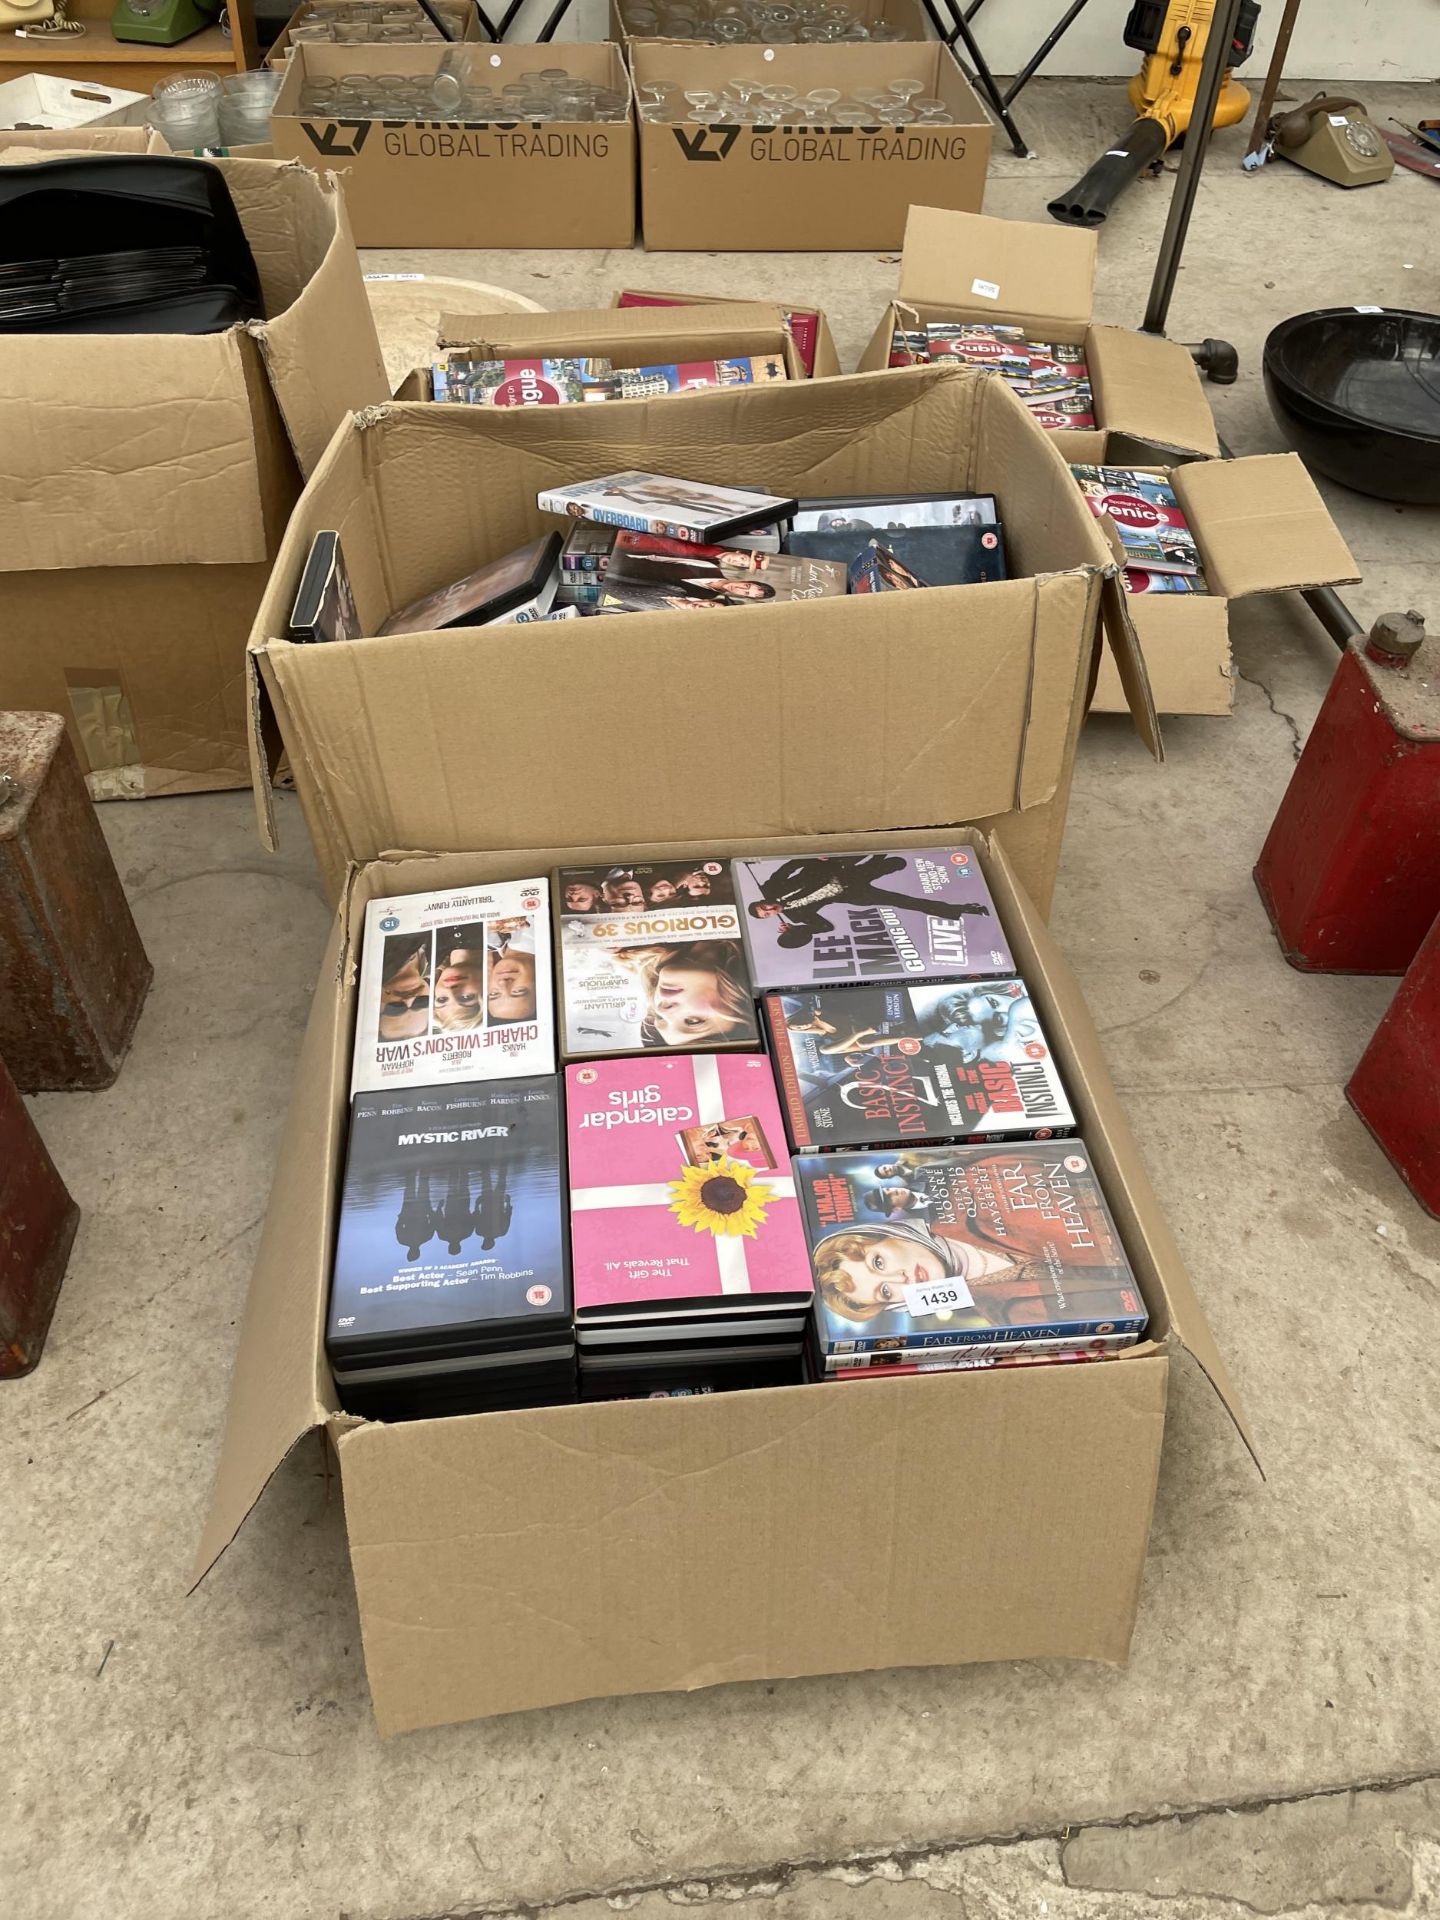 A LARGE ASSORTMENT OF DVDS